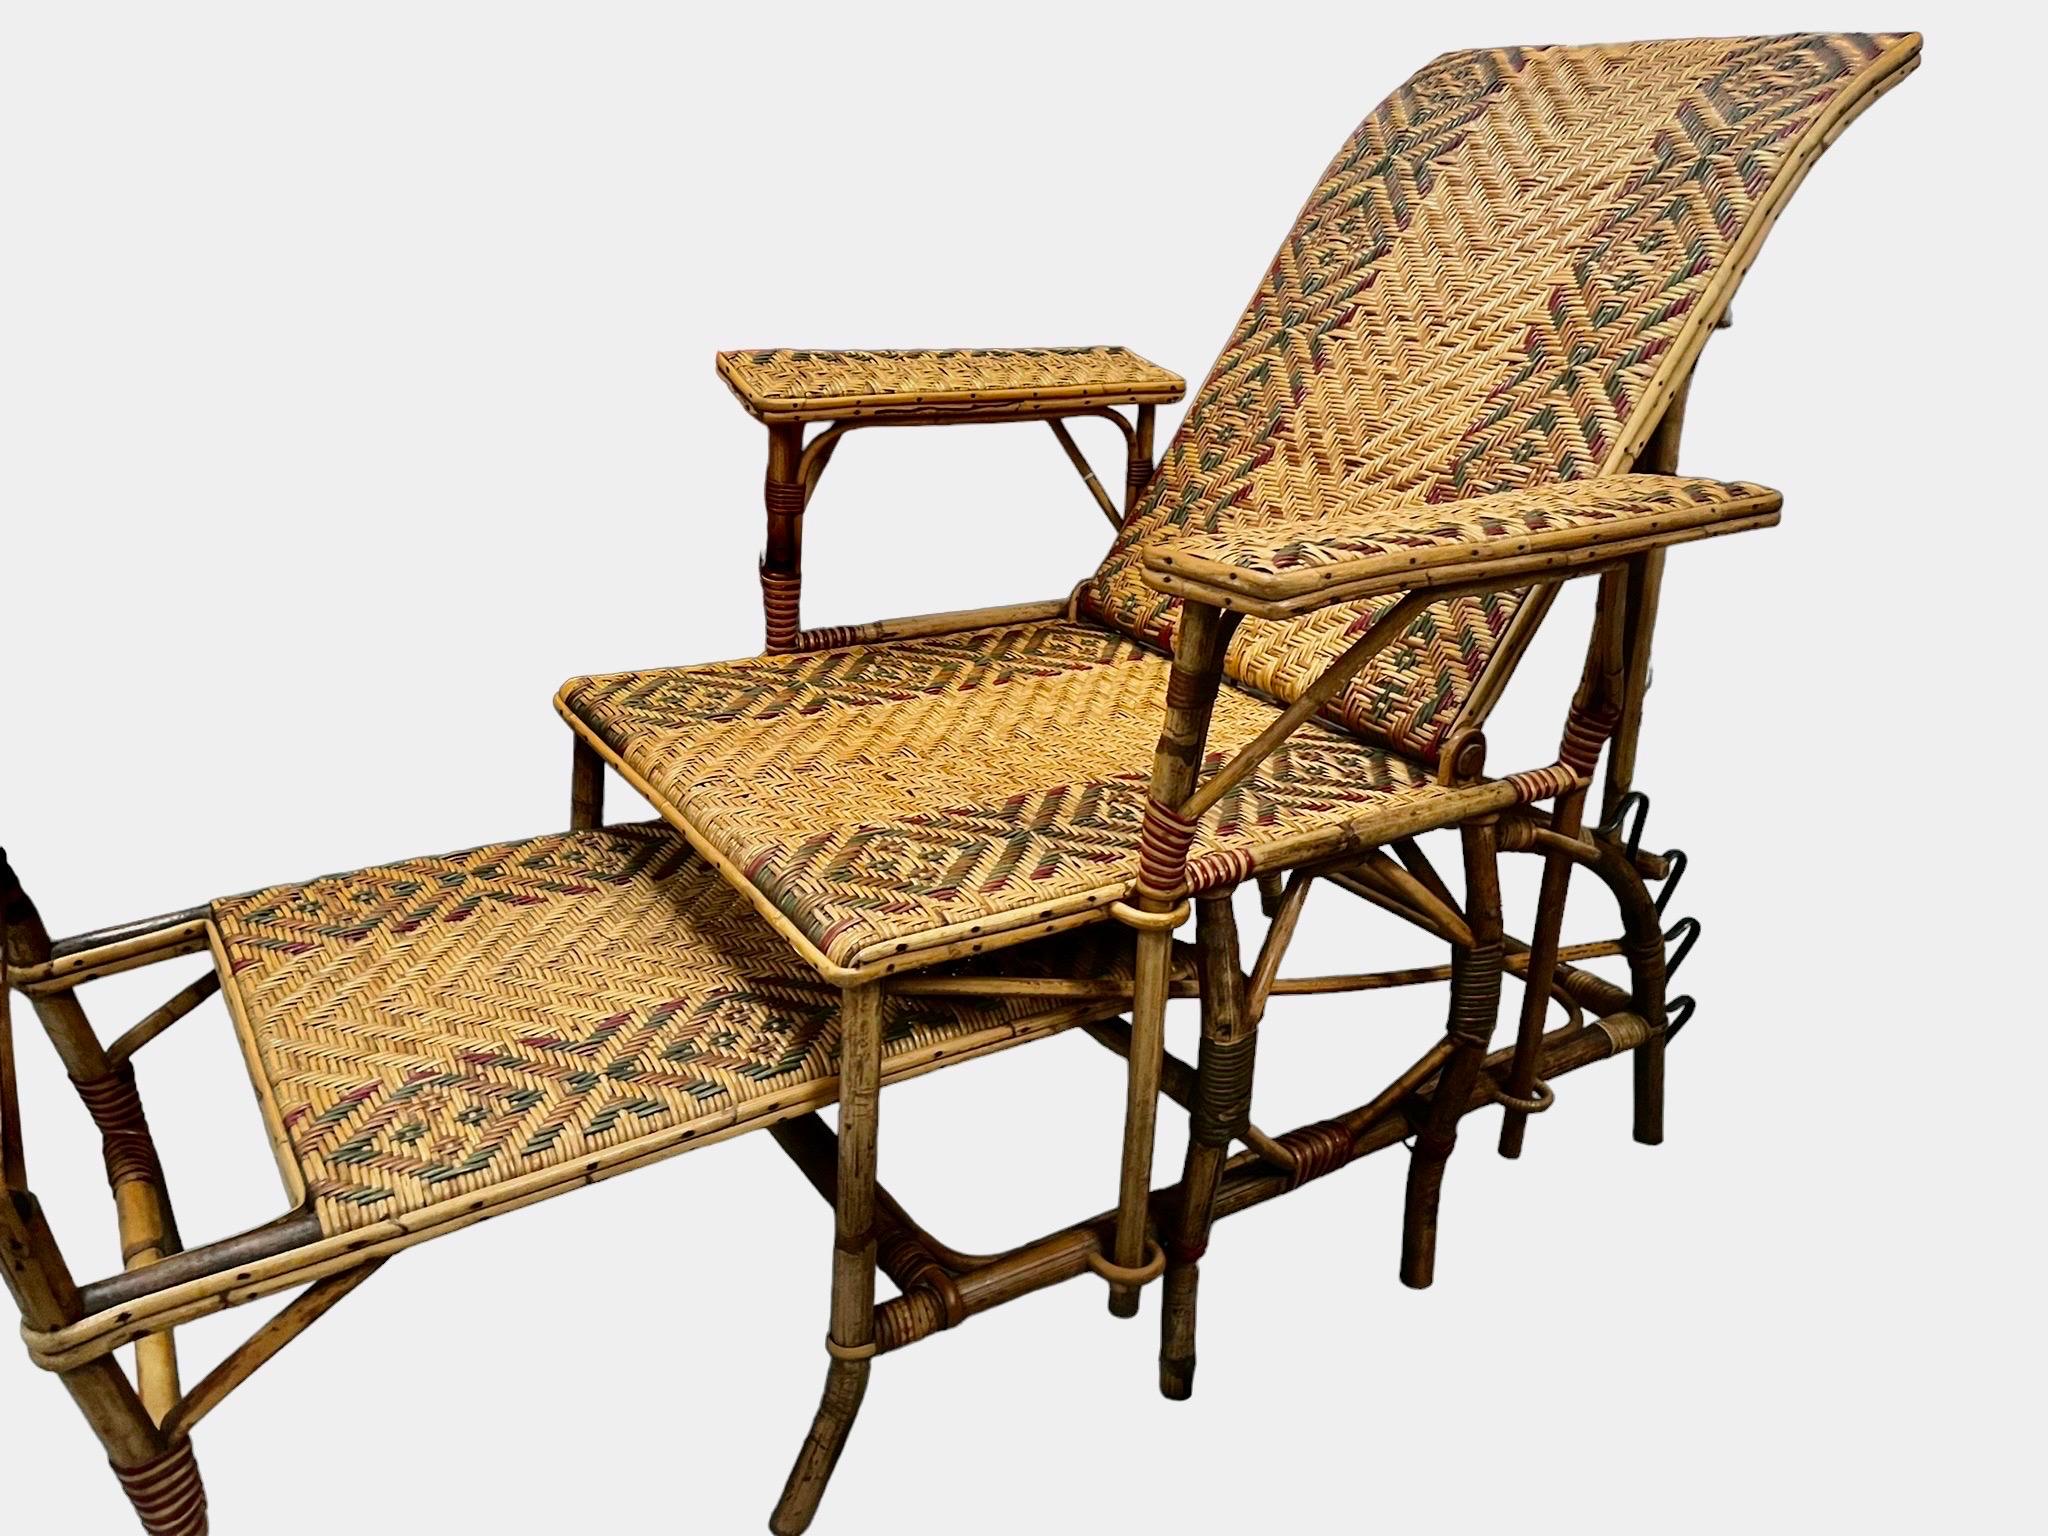 Bamboo Wicker Lounge Chair with Ottoman, 1920s, Spain